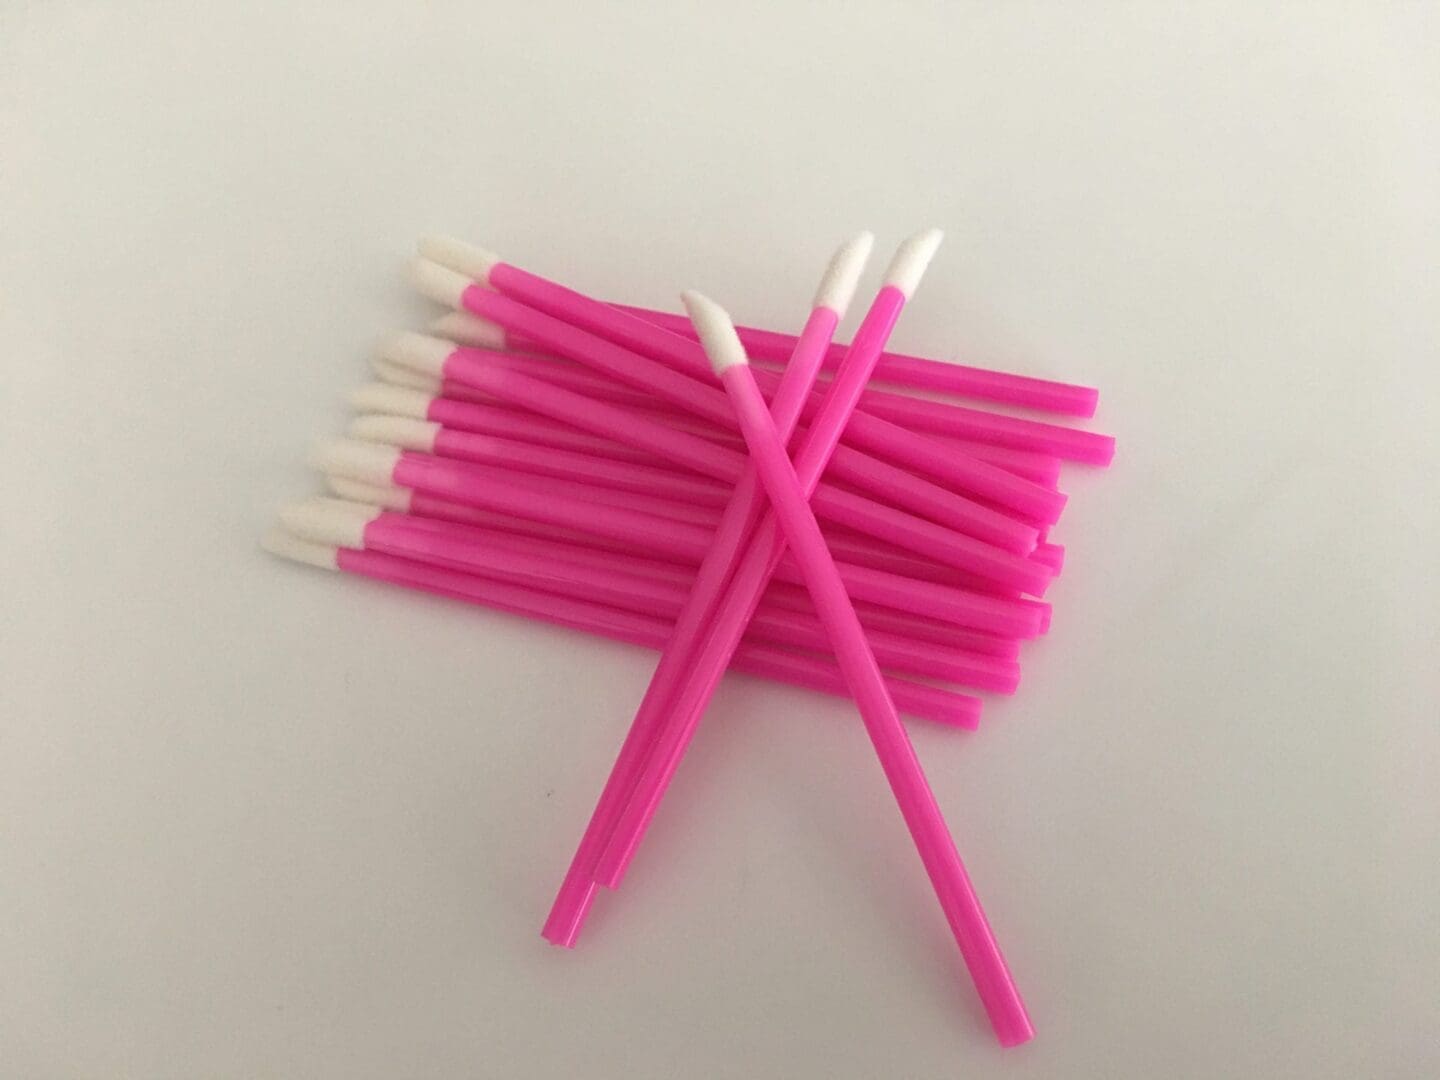 A bunch of pink toothbrushes are laying on the table